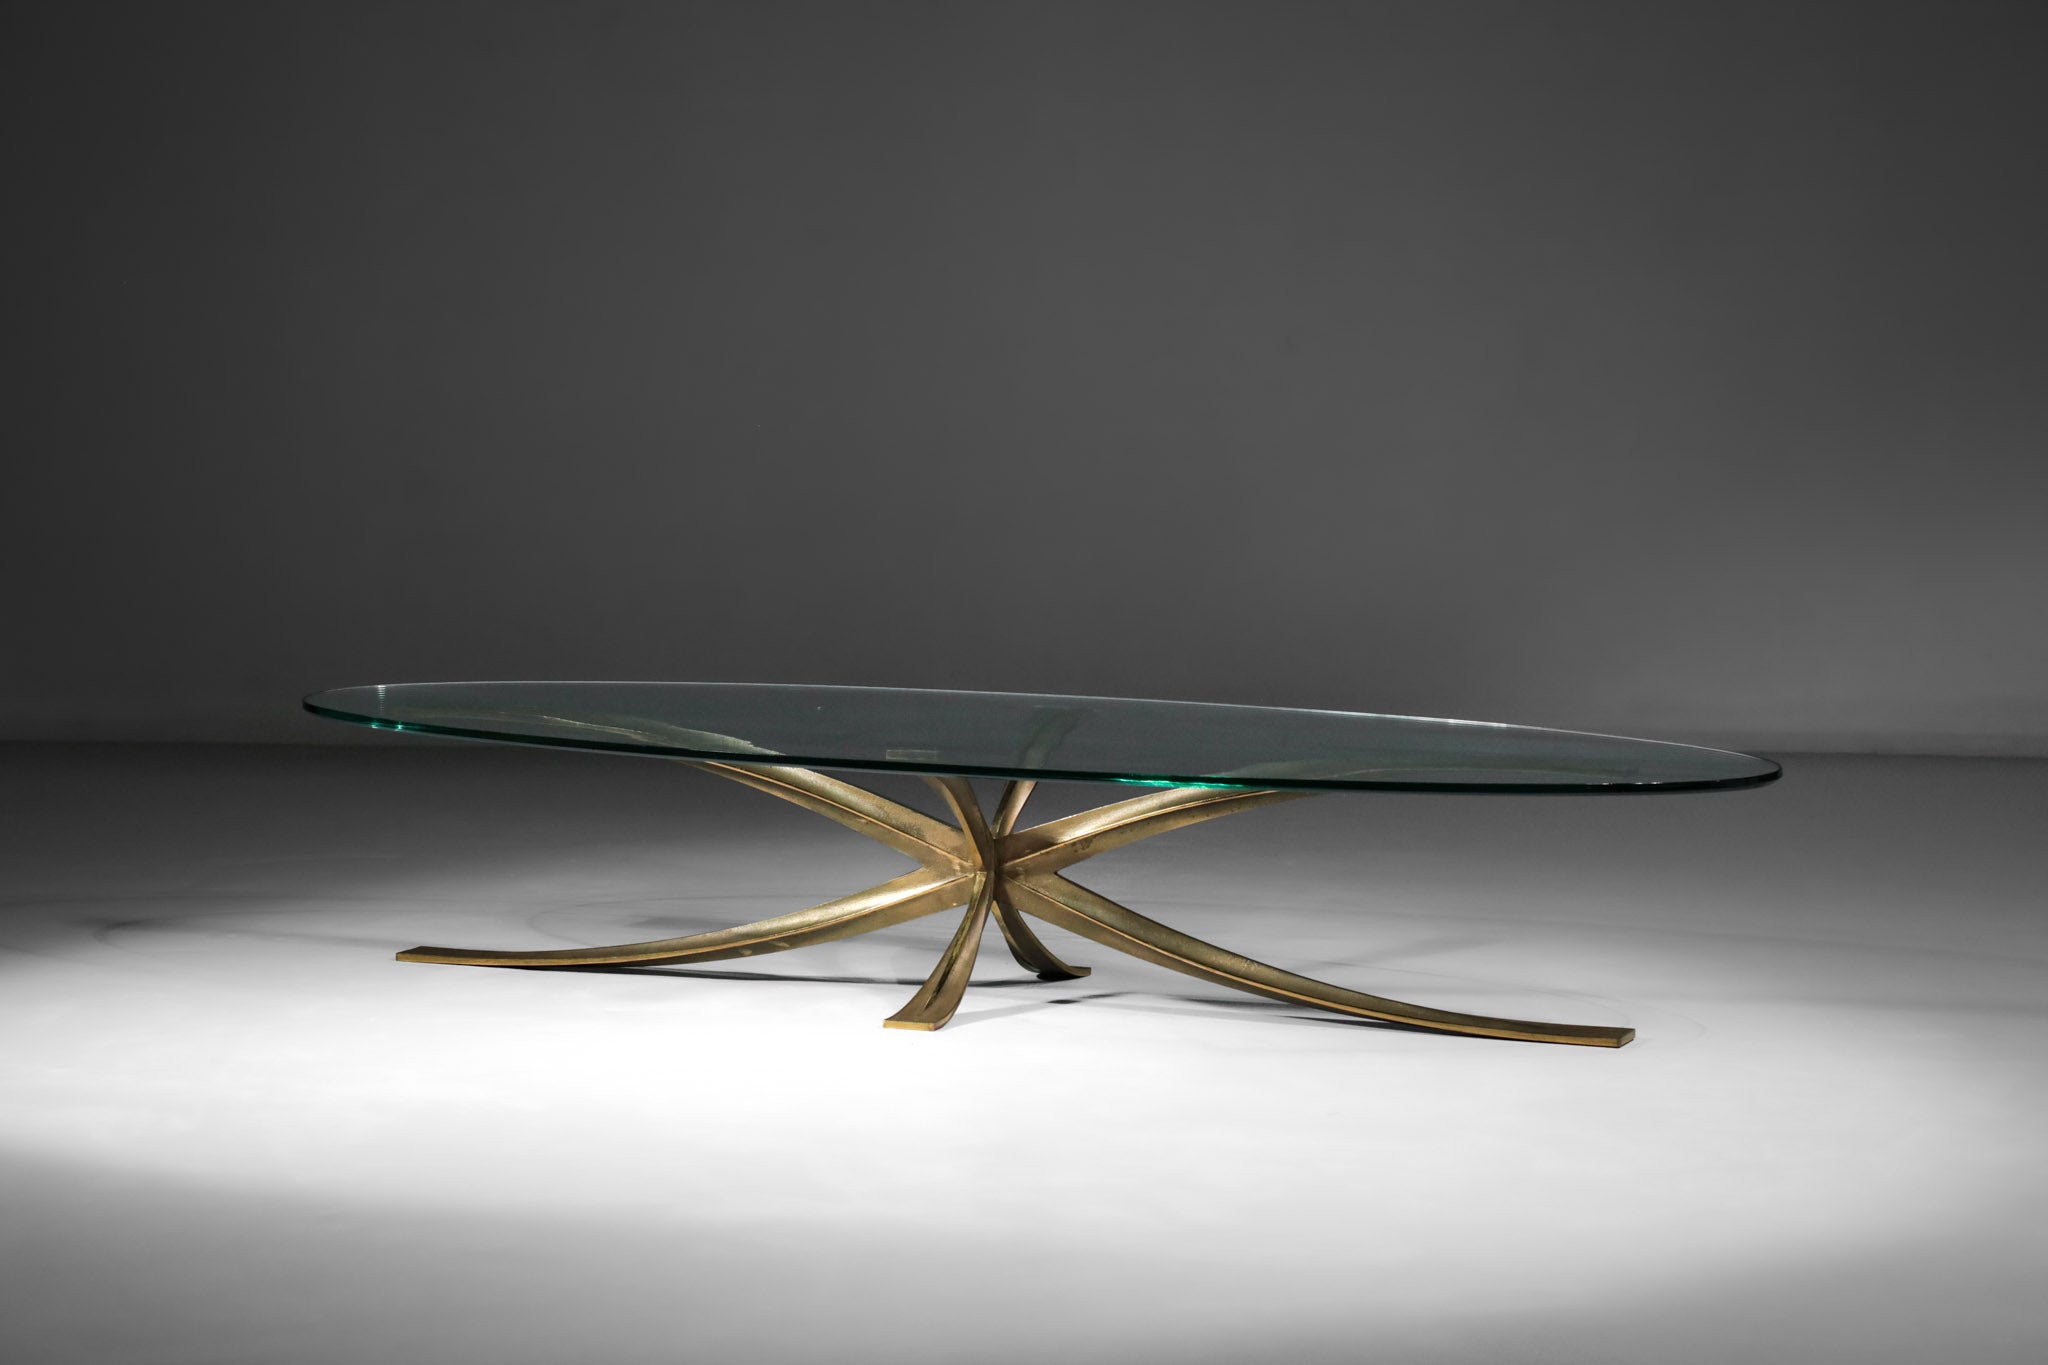 Rare oval coffee table by the French architect Michel Mangematin from the 60's (he created very few pieces of furniture during his career). Star base made of 4 gilded bronze blades and oval glass top, all original and in excellent vintage condition